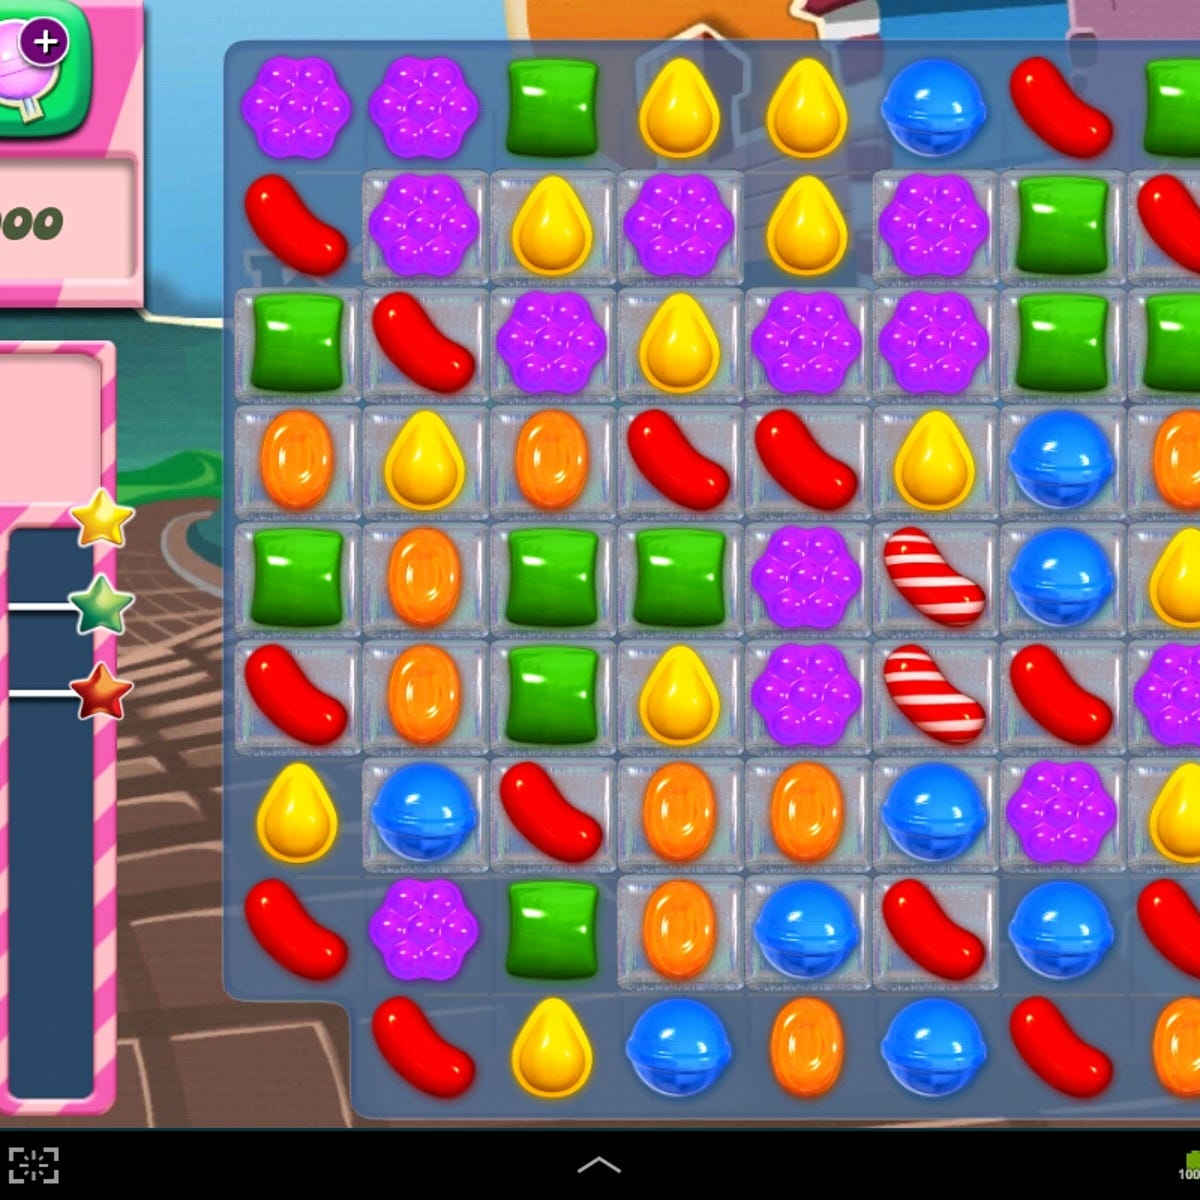 Candy Crush Saga for Android review: Great alternative to